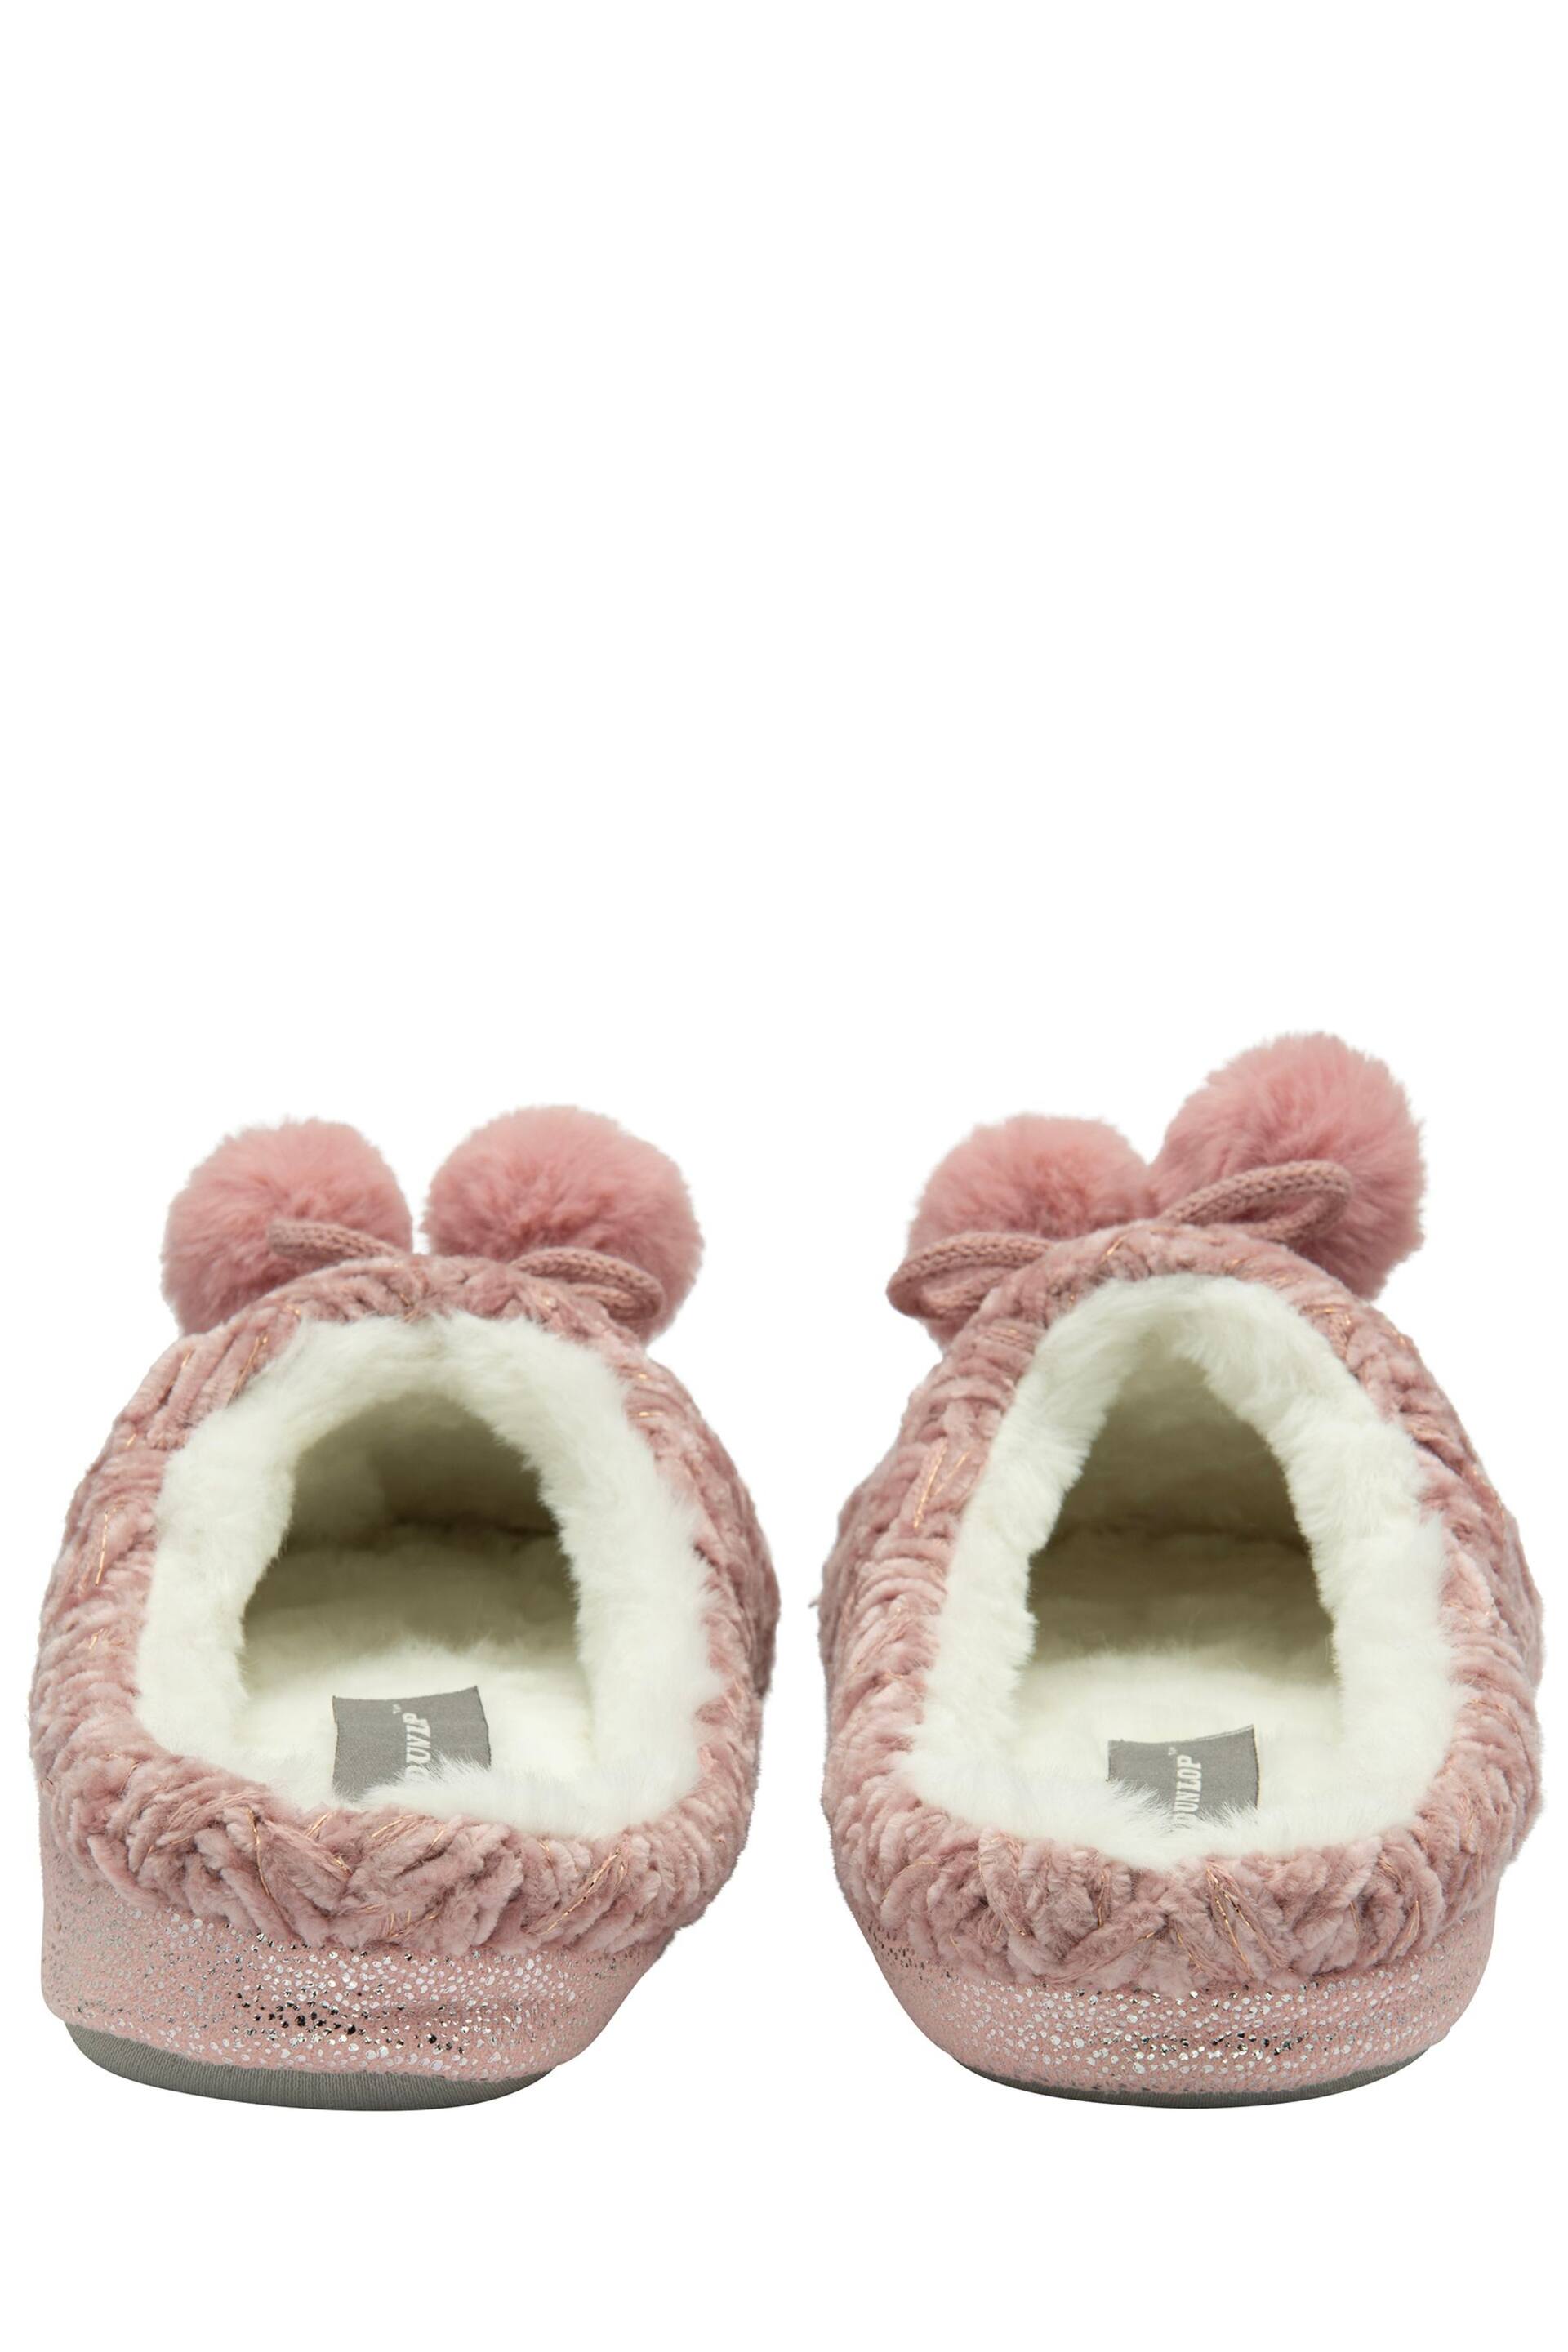 Dunlop Baby Pink Ladies Knitted Closed Toe Mule Slippers - Image 3 of 4